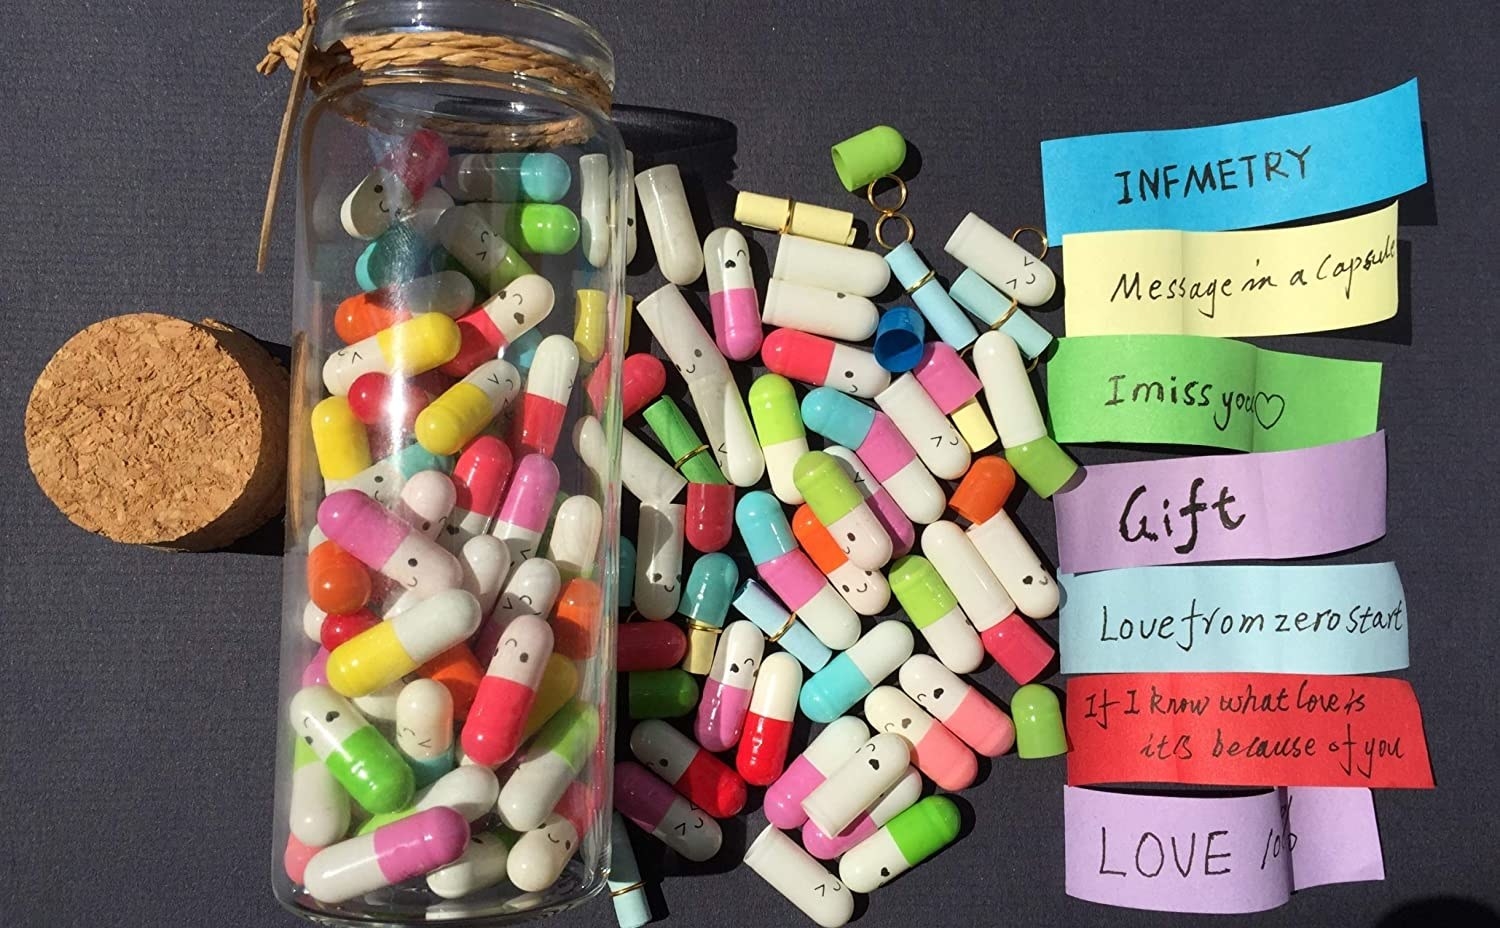 The pills and messages